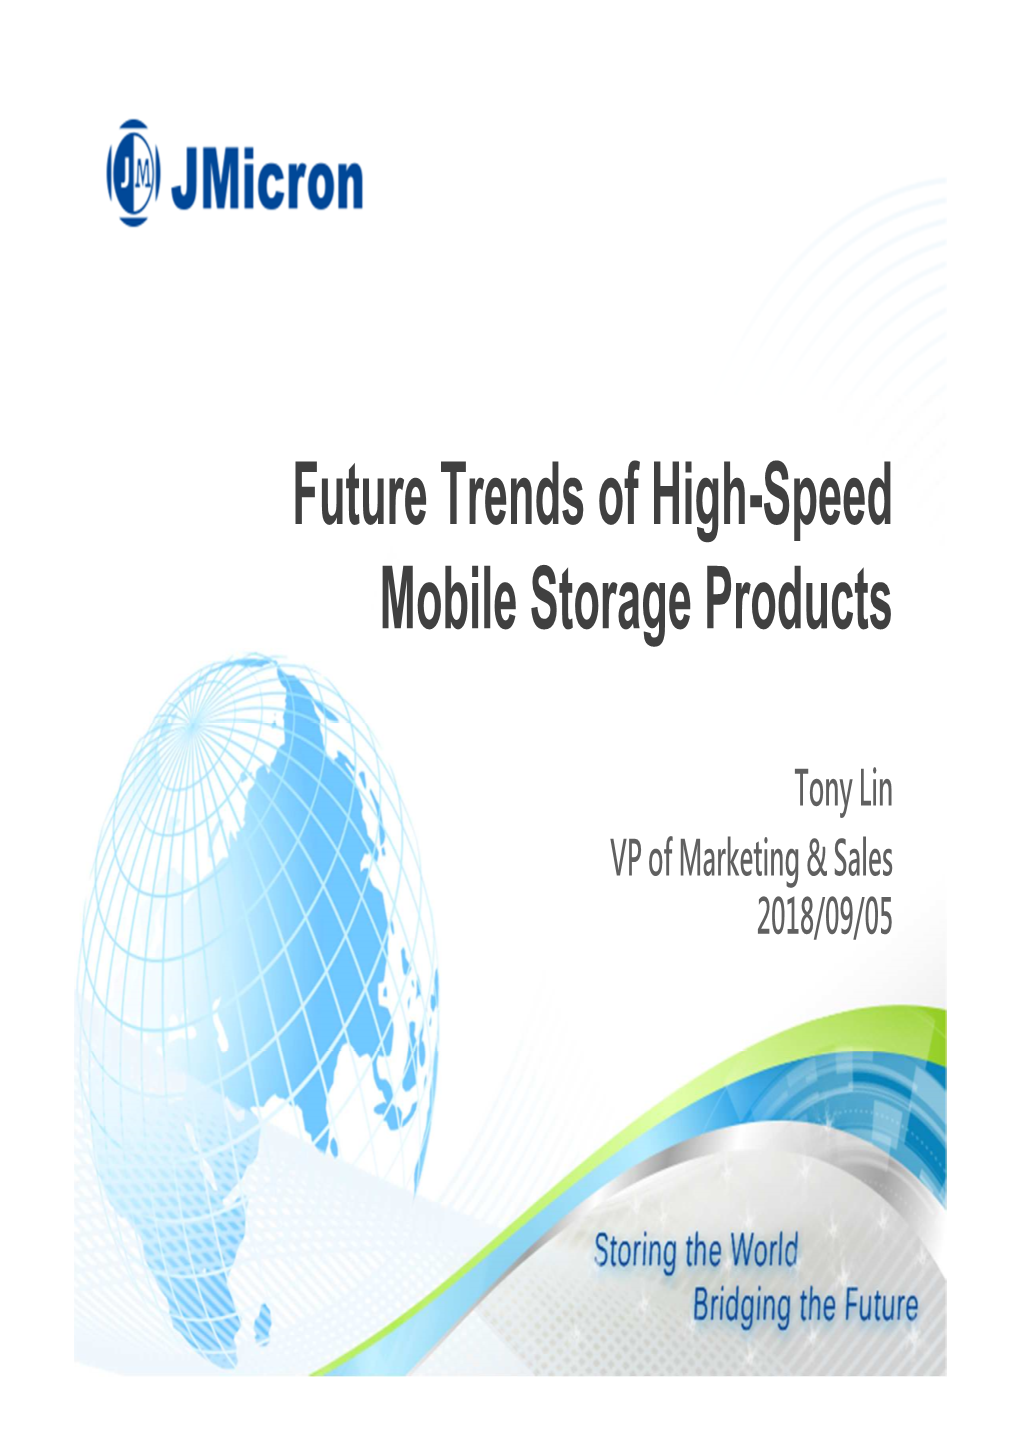 Future Trends of High-Speed Mobile Storage Products